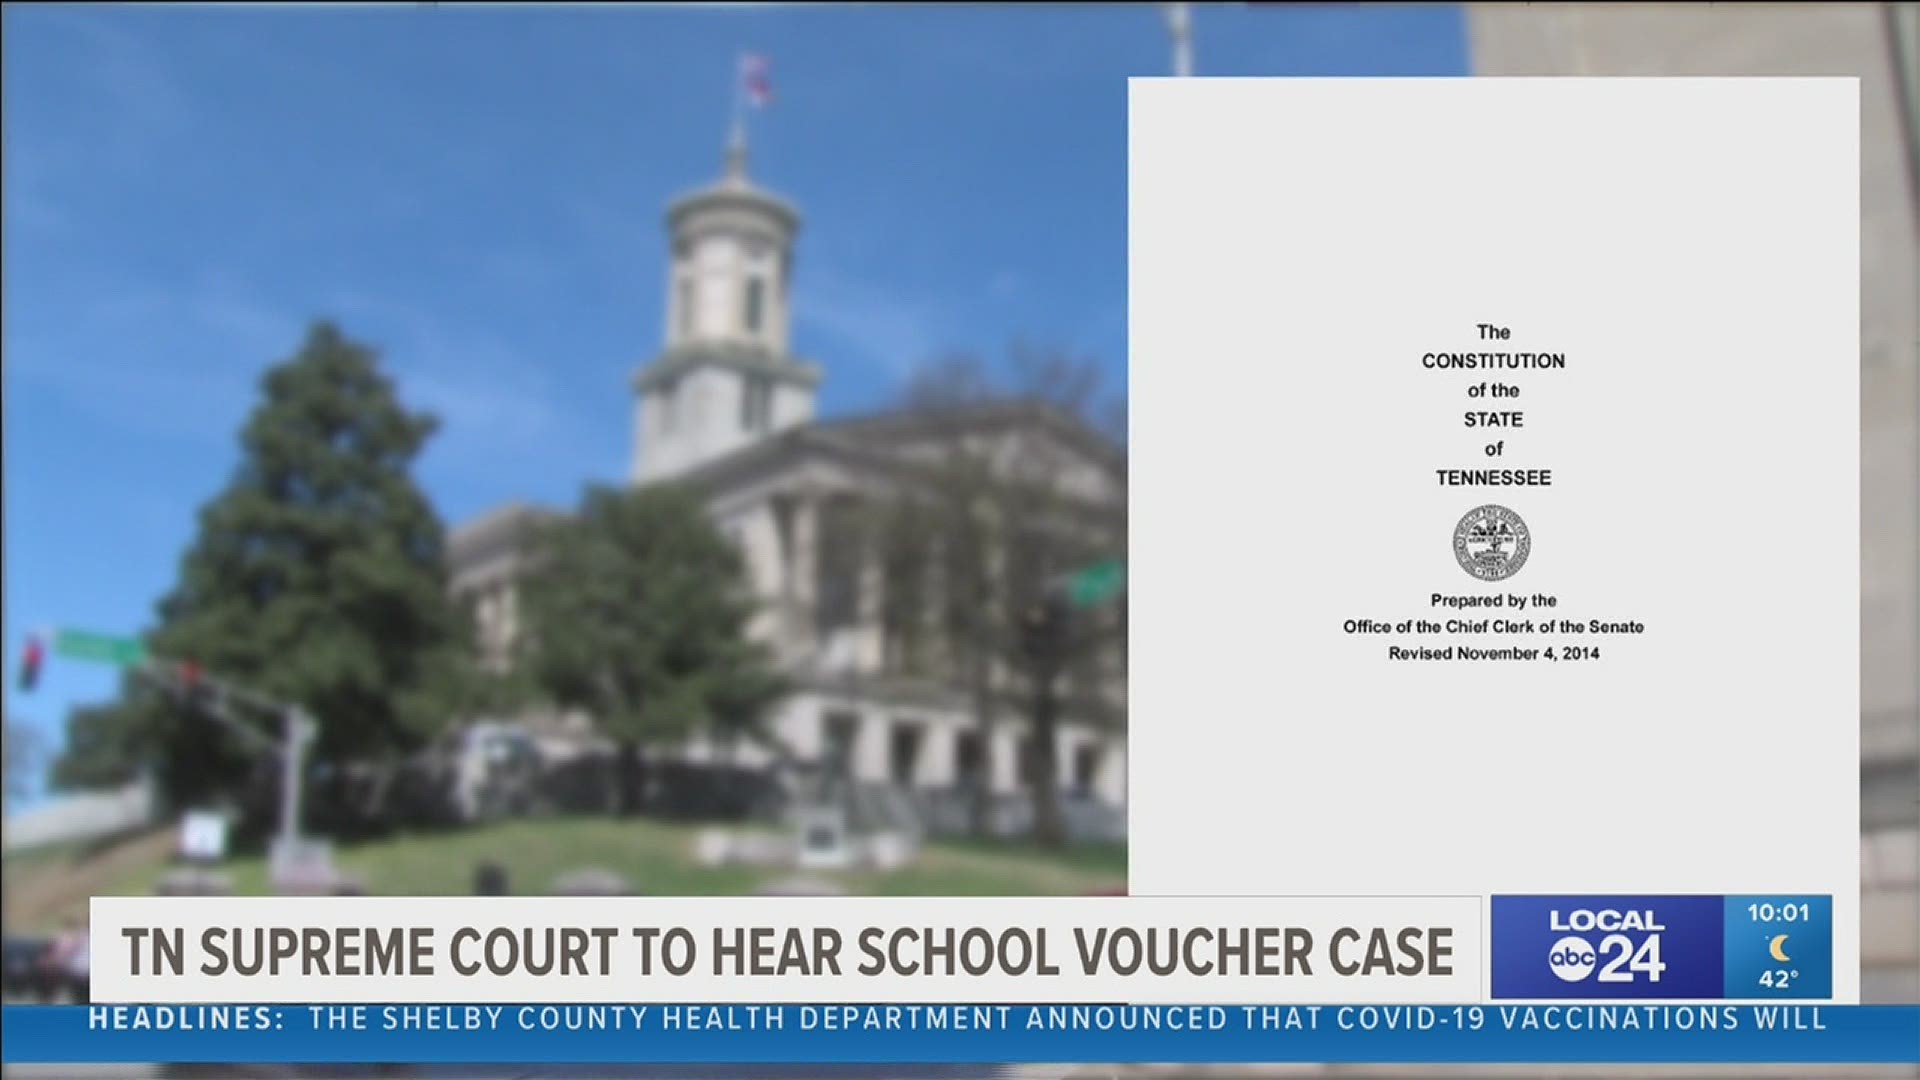 Ruled unconstitutional less than a year ago, school vouchers could get a second chance.